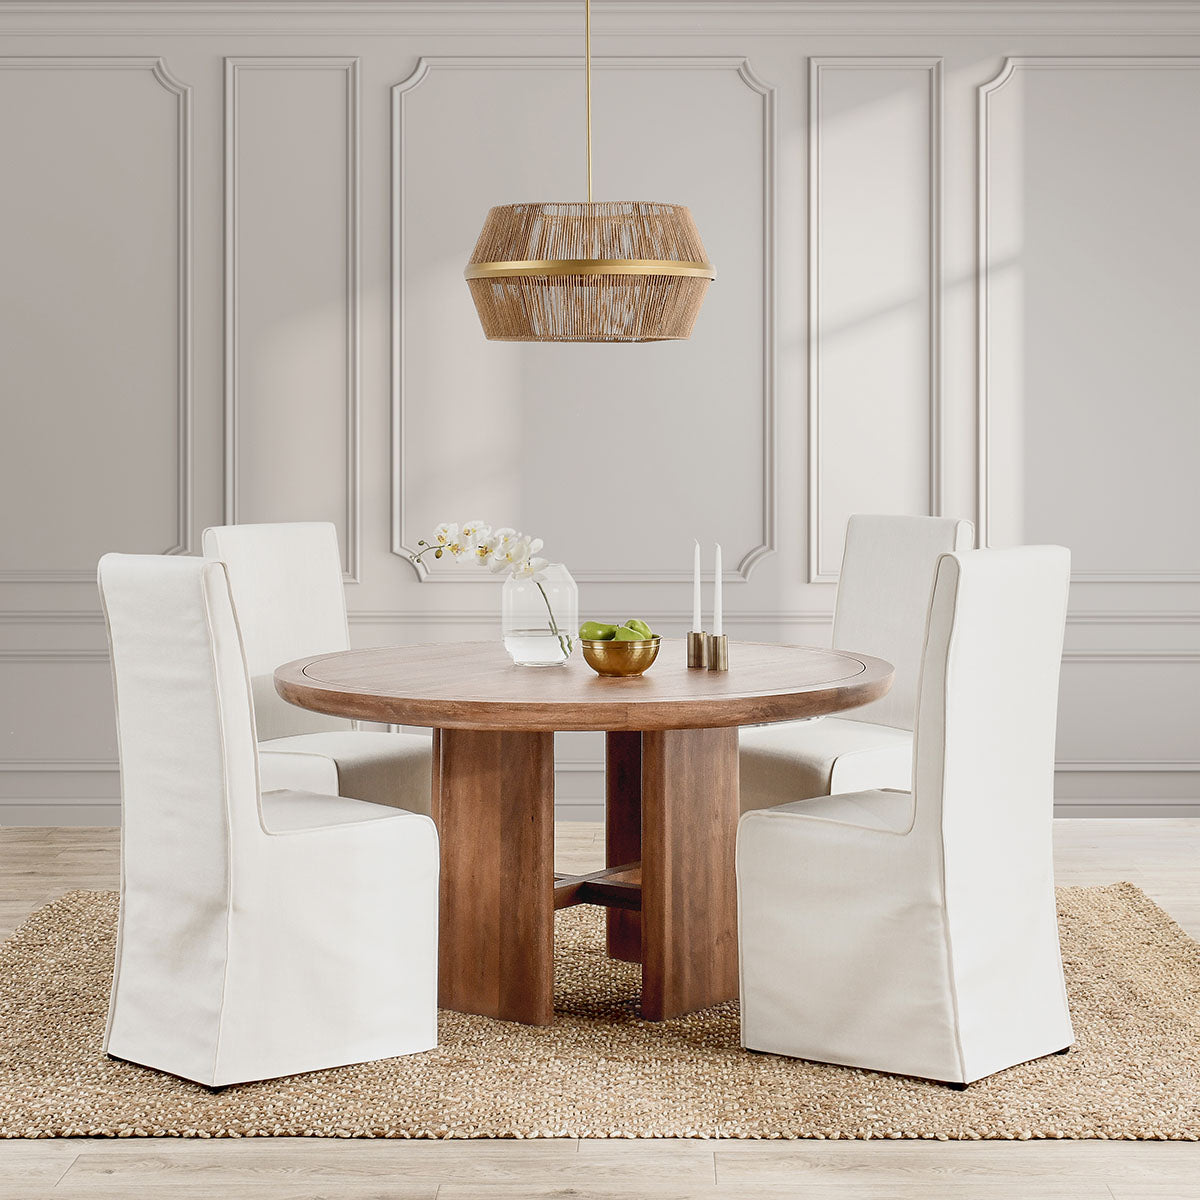 Selena 60" Round Dining Table Umber